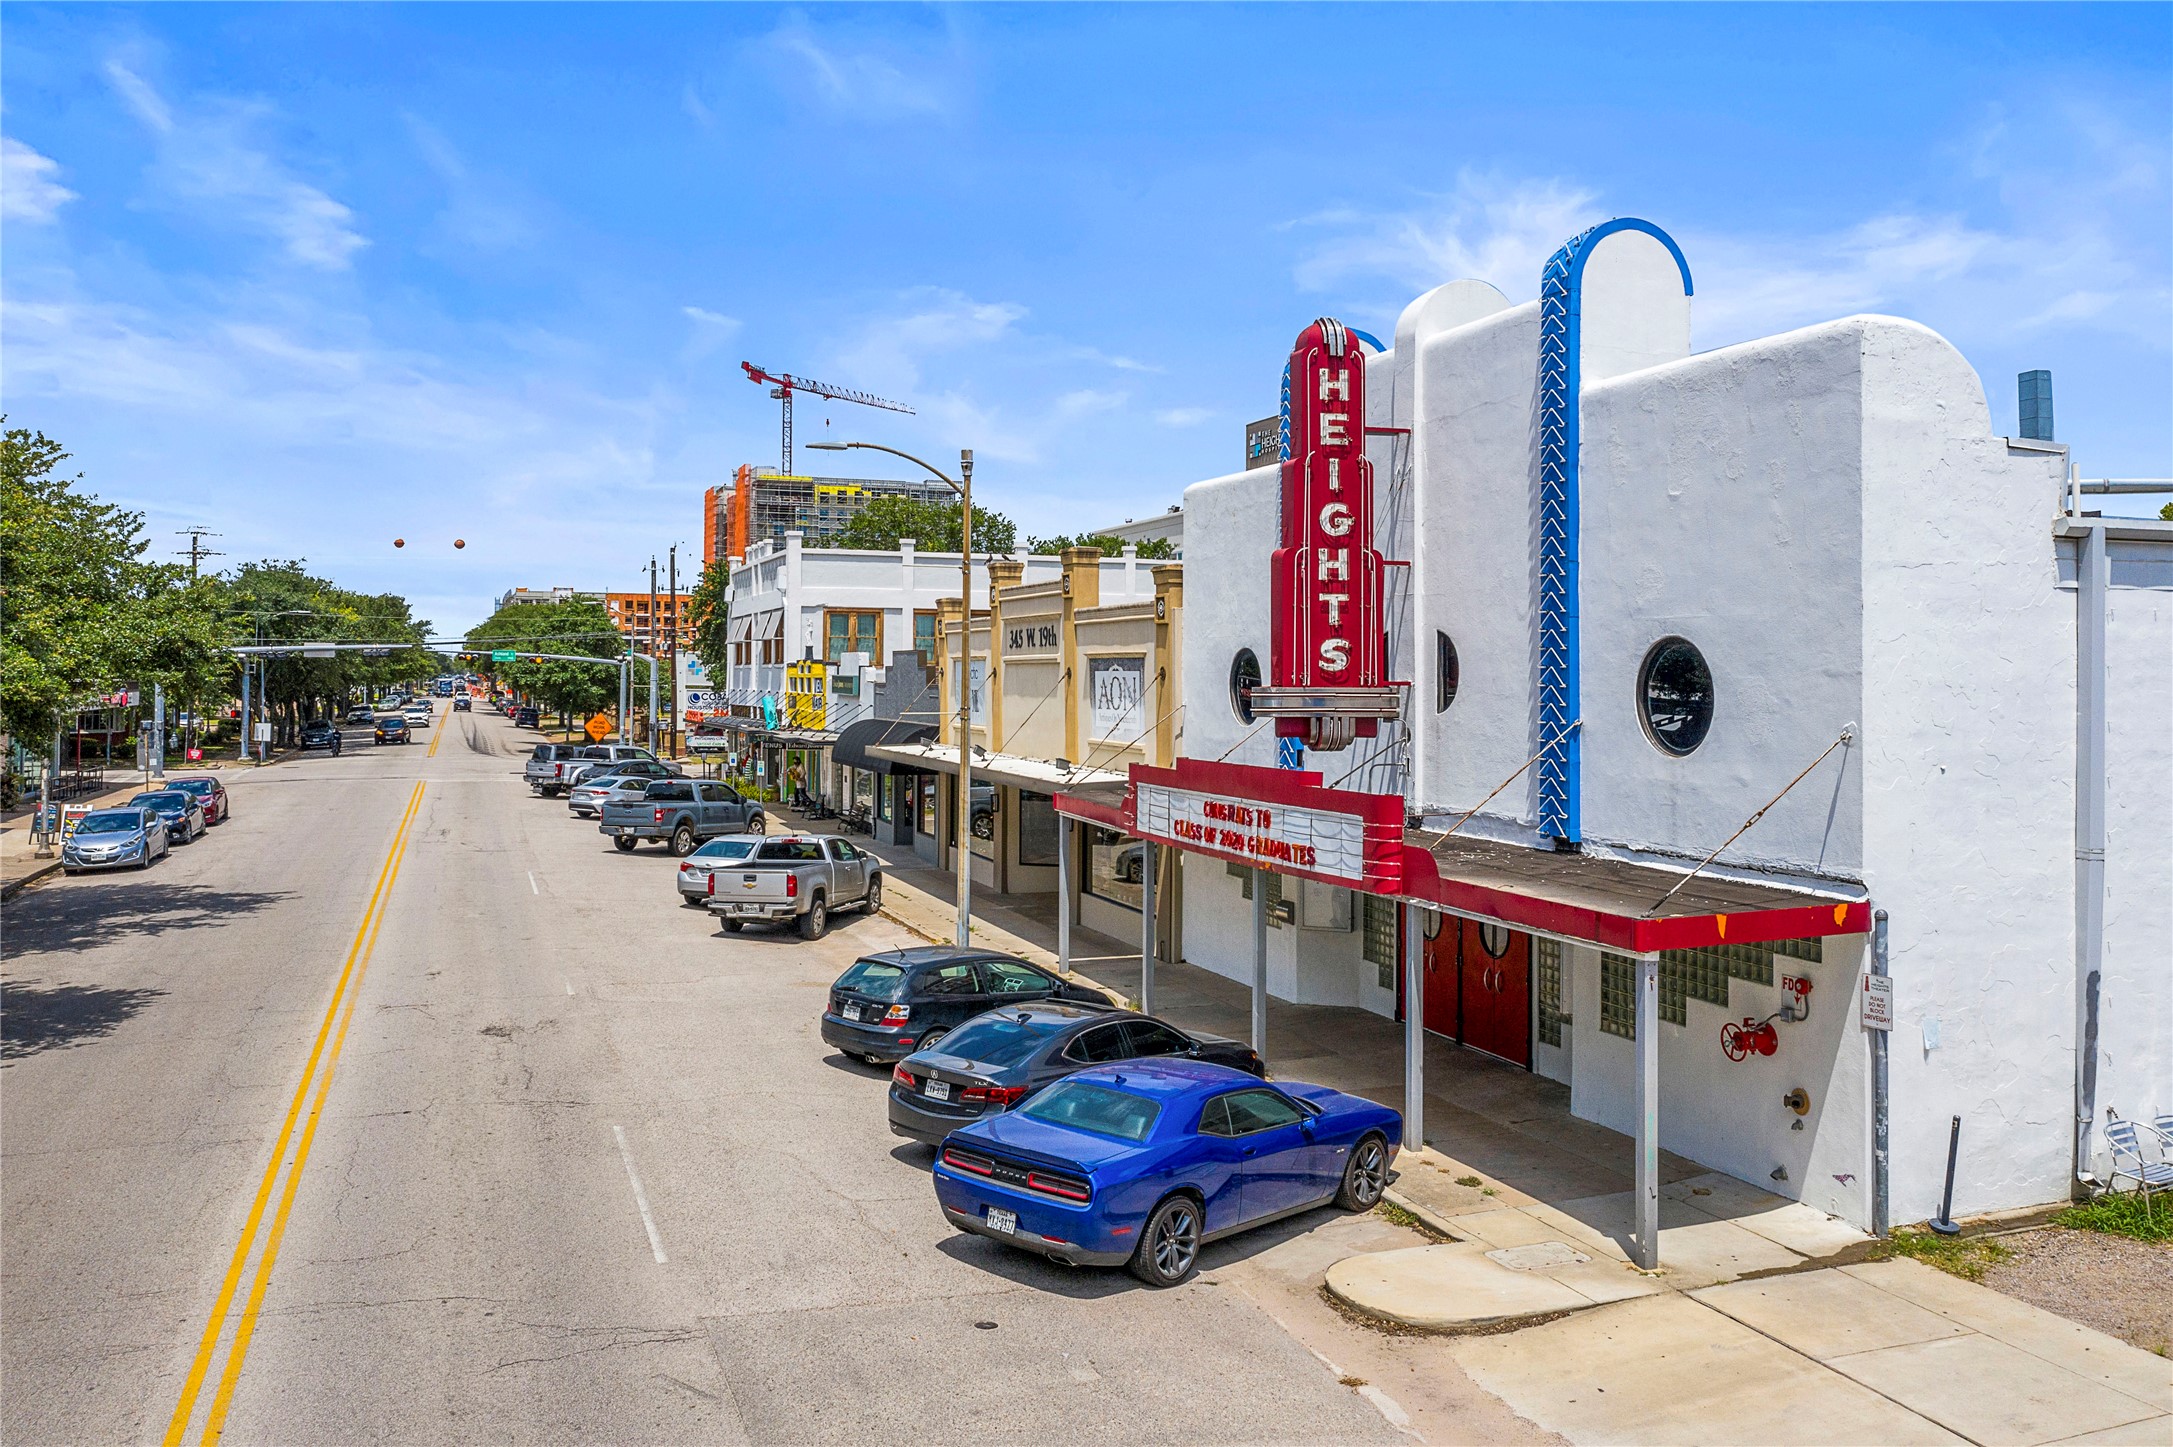 Indulge in retail therapy amidst the wealth of specialty shops, art galleries, and vintage stores at the vibrant Historic Houston Heights Shopping District.